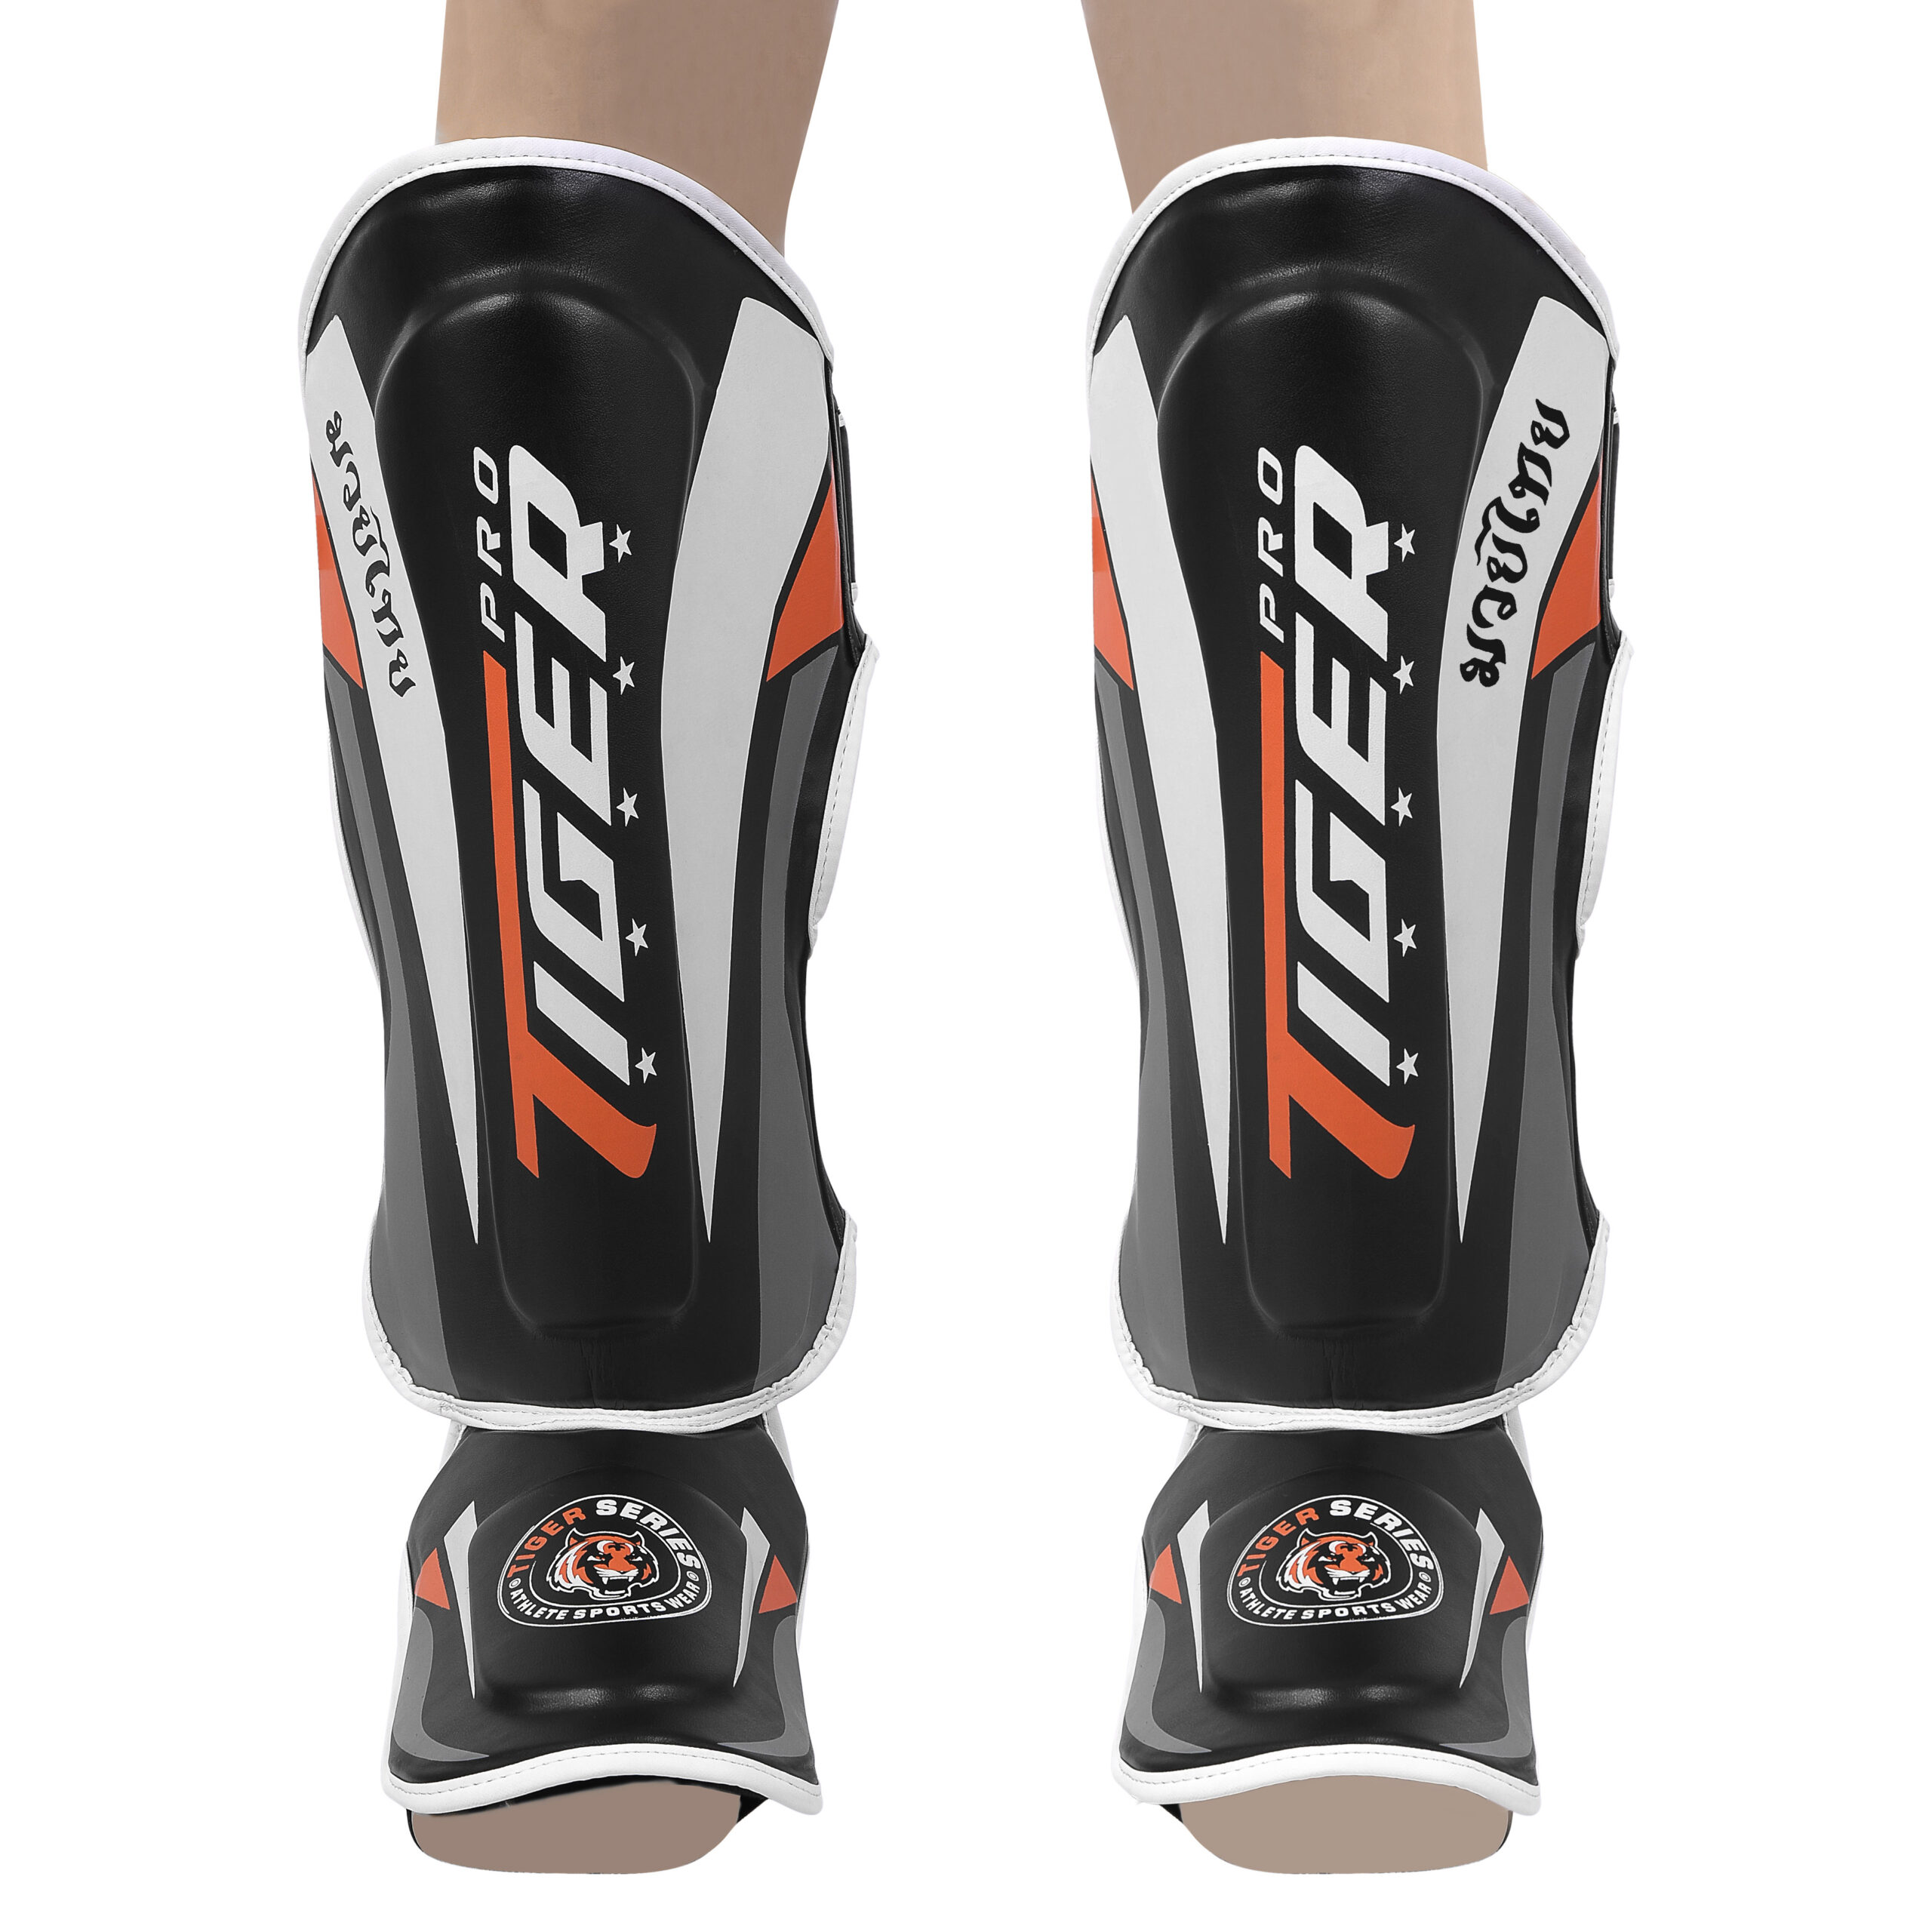 Sparring Shin guards with Instep